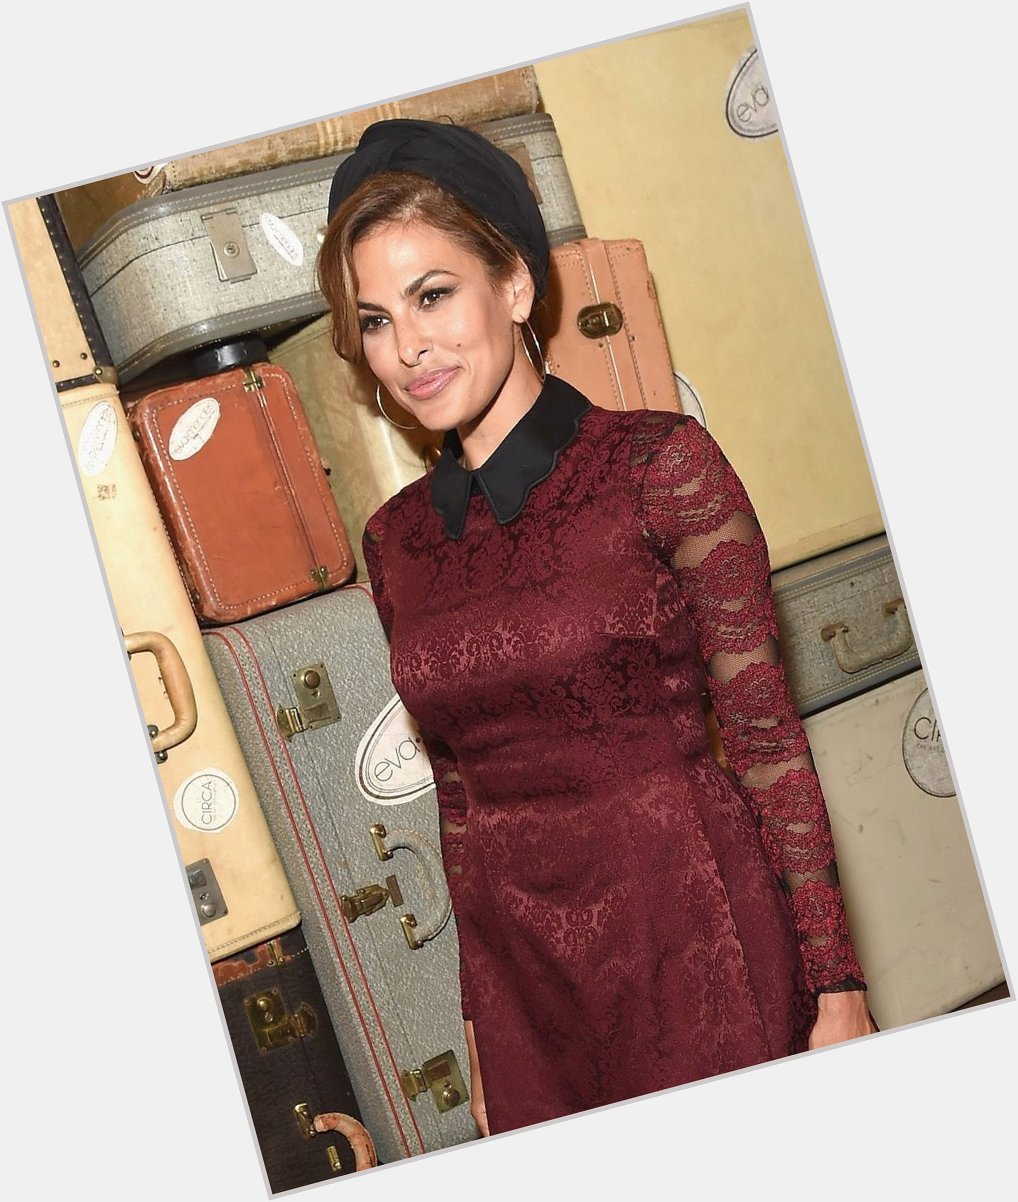 We can\t let this Sunday skip by without wishing Eva Mendes a Happy Birthday! Making Latinas look flawless. 